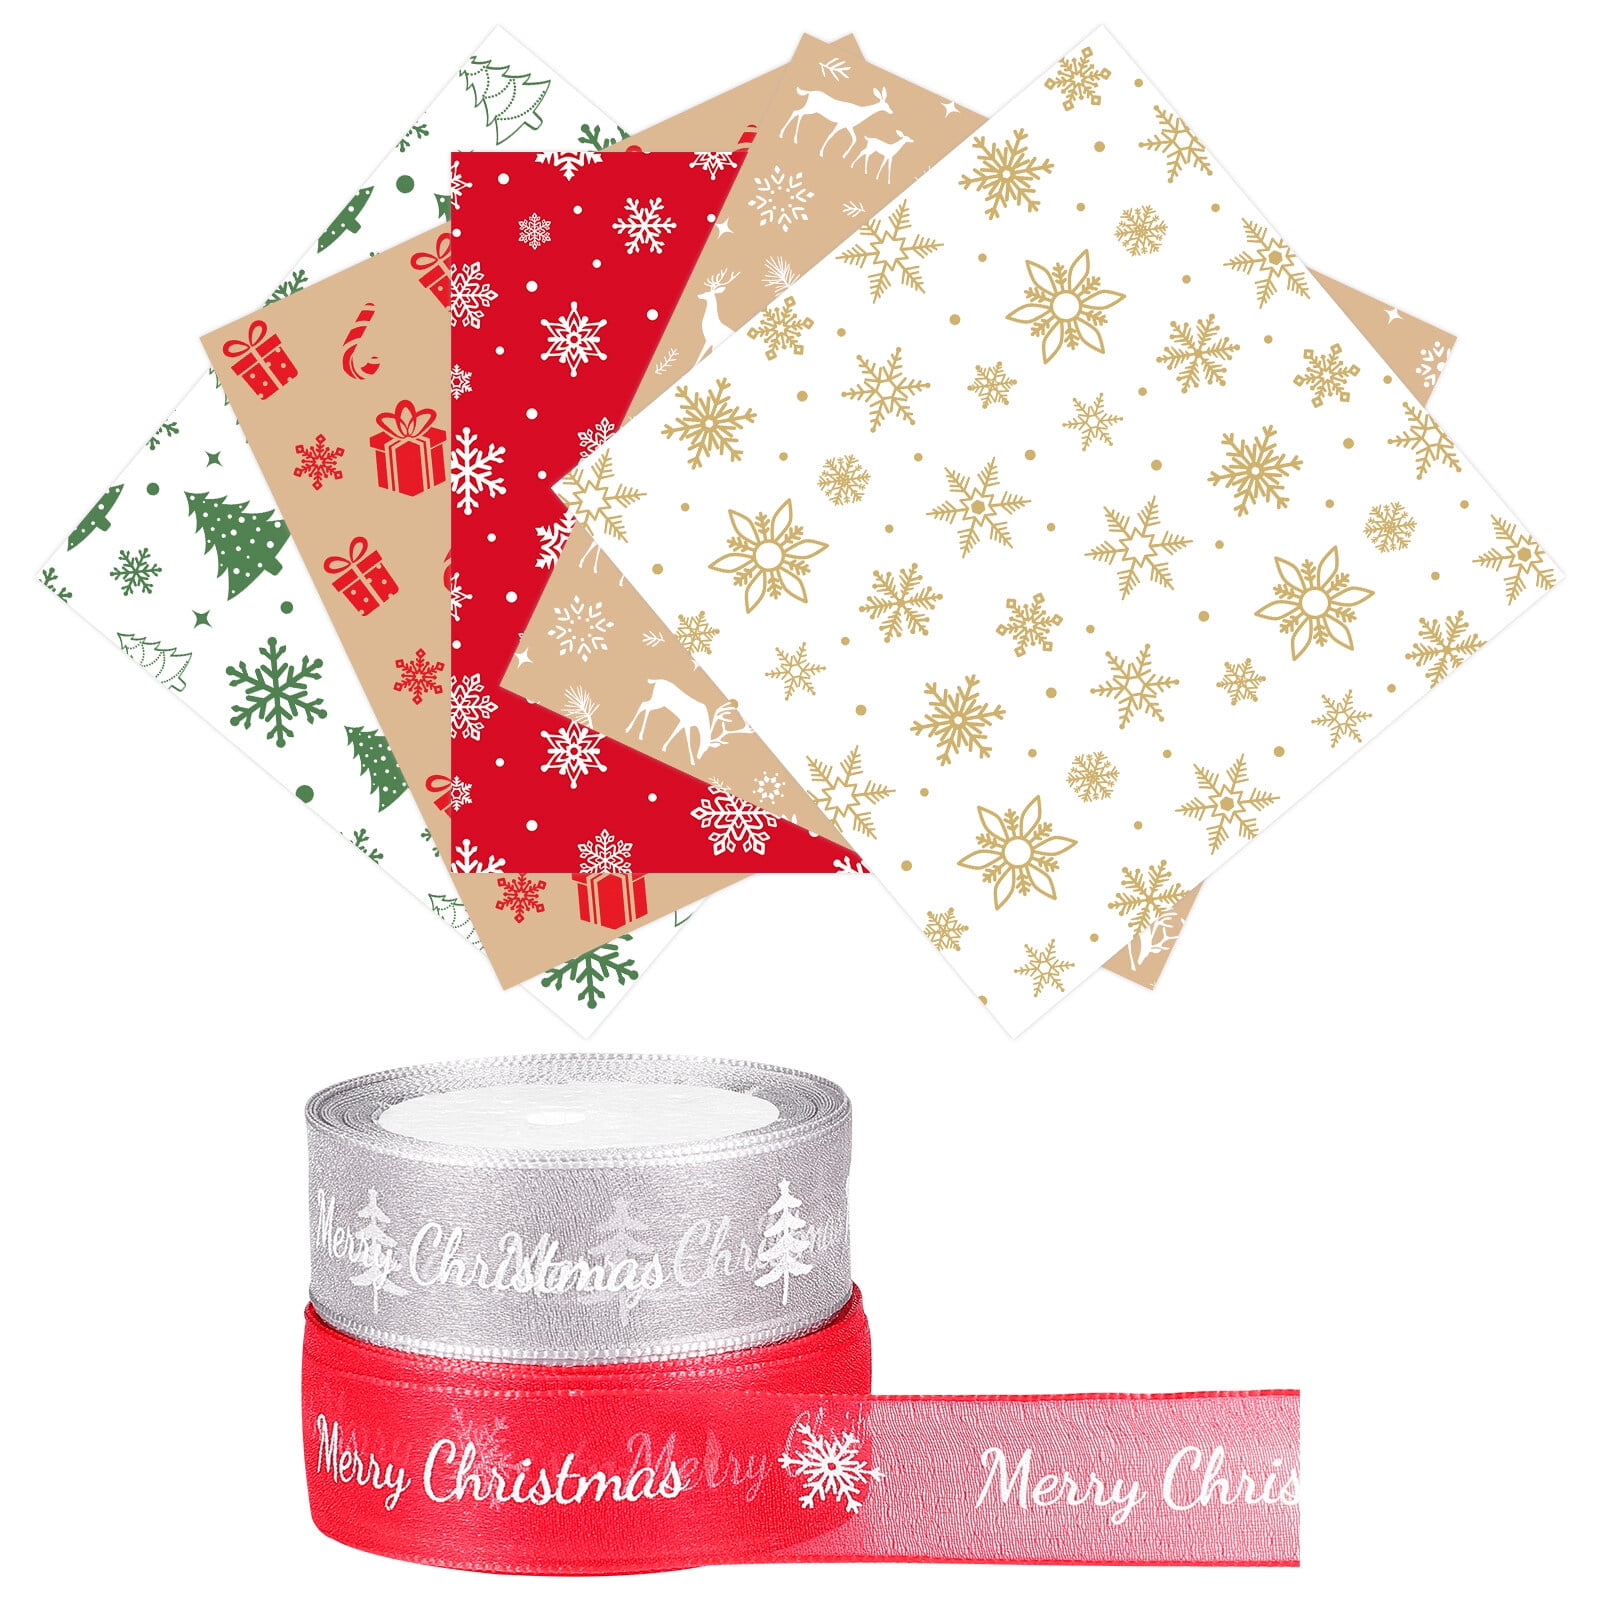 JAM PAPER Industrial Size Bulk Wrapping Paper Rolls - Holiday Hoot - 1/2  Ream (1042.5 Sq Ft) - Sold Individually 